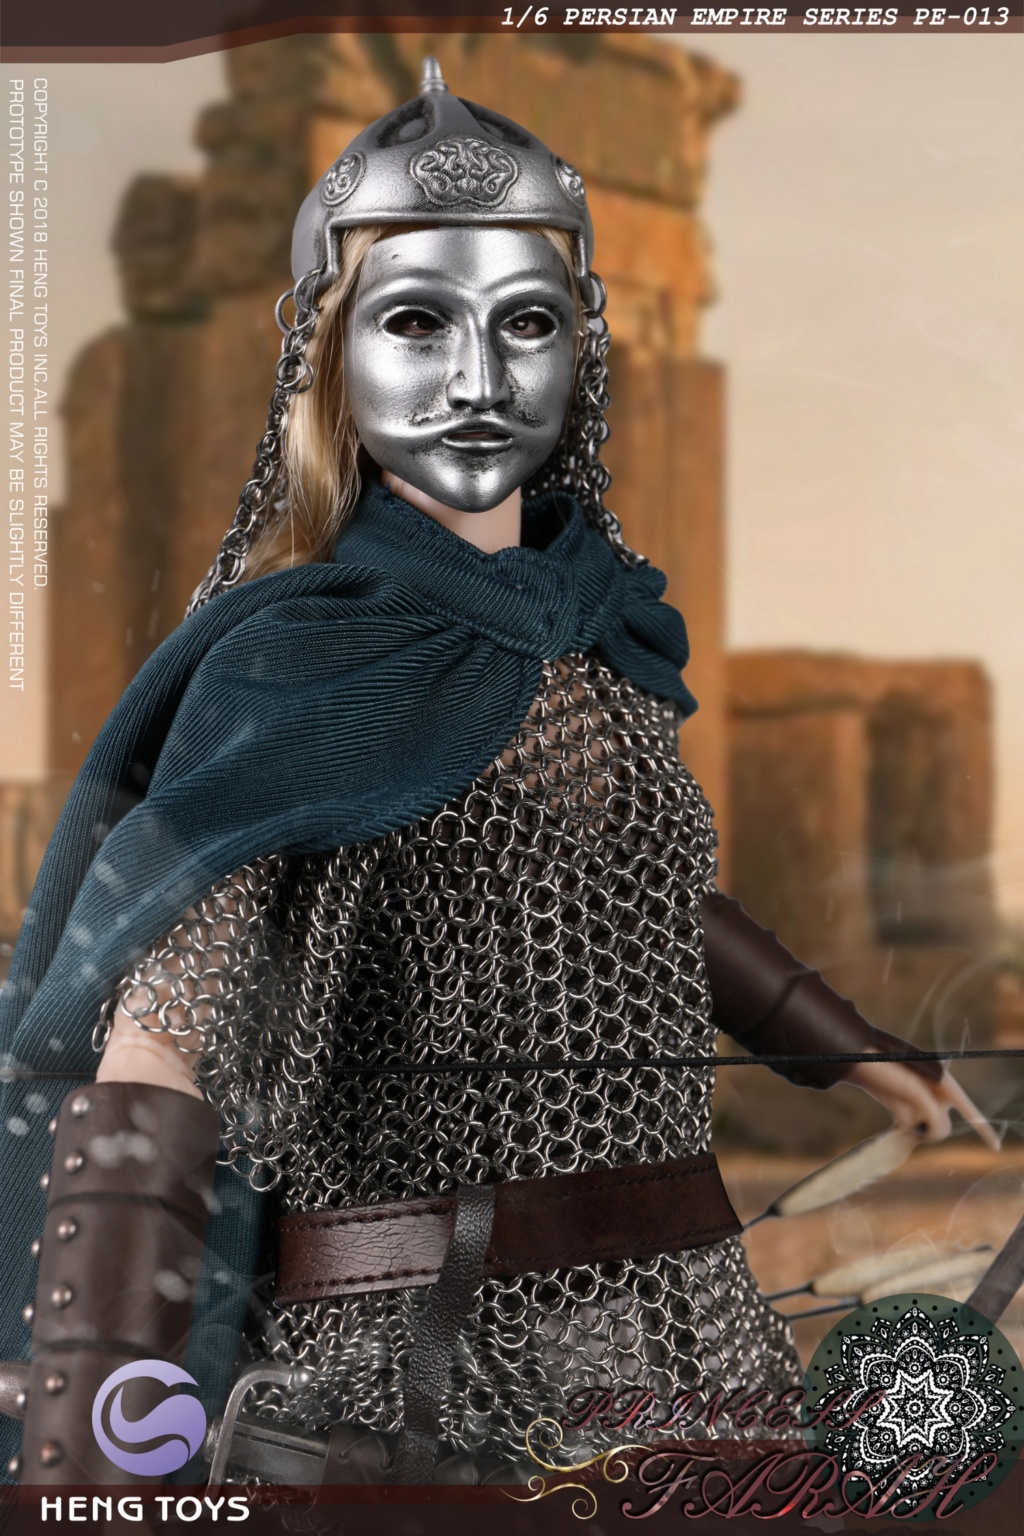 Female - NEW PRODUCT: HENG TOYS: 1/6 Persian Female Archer Standard Edition (PE012) & High Edition (PE013) 10381110